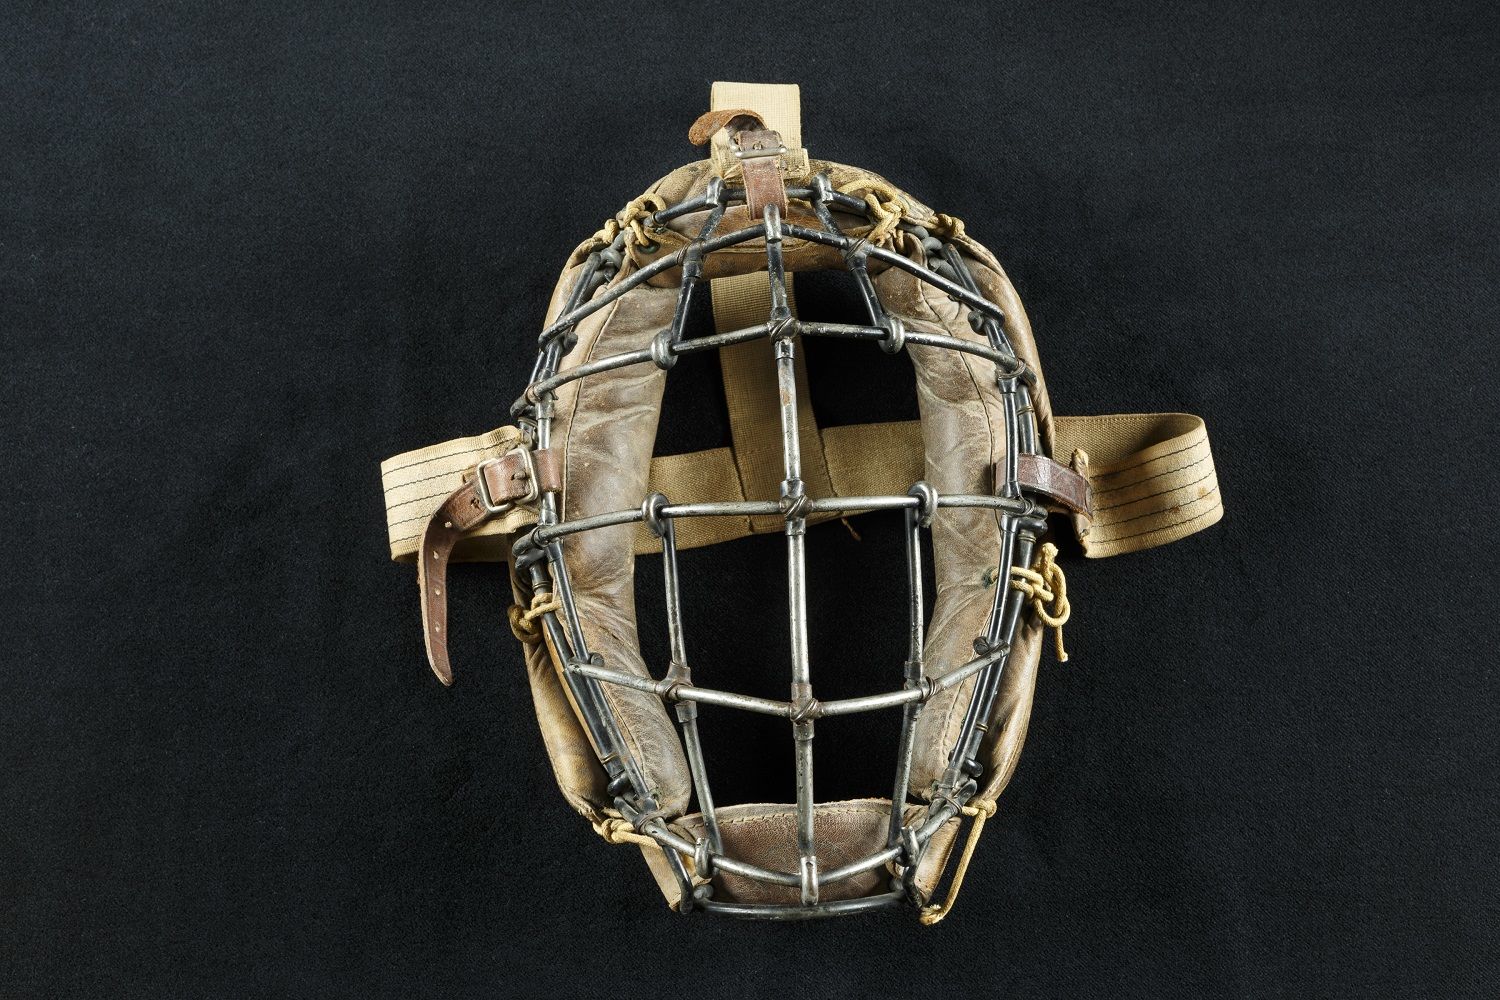 Early Catcher’s Mask 
With a well-earned fear of foul tips ricocheting off his head, Harvard’s Alexander Tyng wore a converted fencer’s mask for a game in 1877, becoming the first-known player to don a catcher’s mask. Only a year later, the patented headgear appeared in Spalding’s sporting goods catalog and professional catchers began wearing masks. Modest modifications followed, such as additional padding and buckled straps. Charles Arnold, a student at Phillips Academy and Yale, used this mask from 1905 to 1914.
Charles Arnold’s catcher’s mask, 1905. Canvas, leather, and metal. Courtesy of the National Baseball Hall of Fame and Museum (082.00.00)